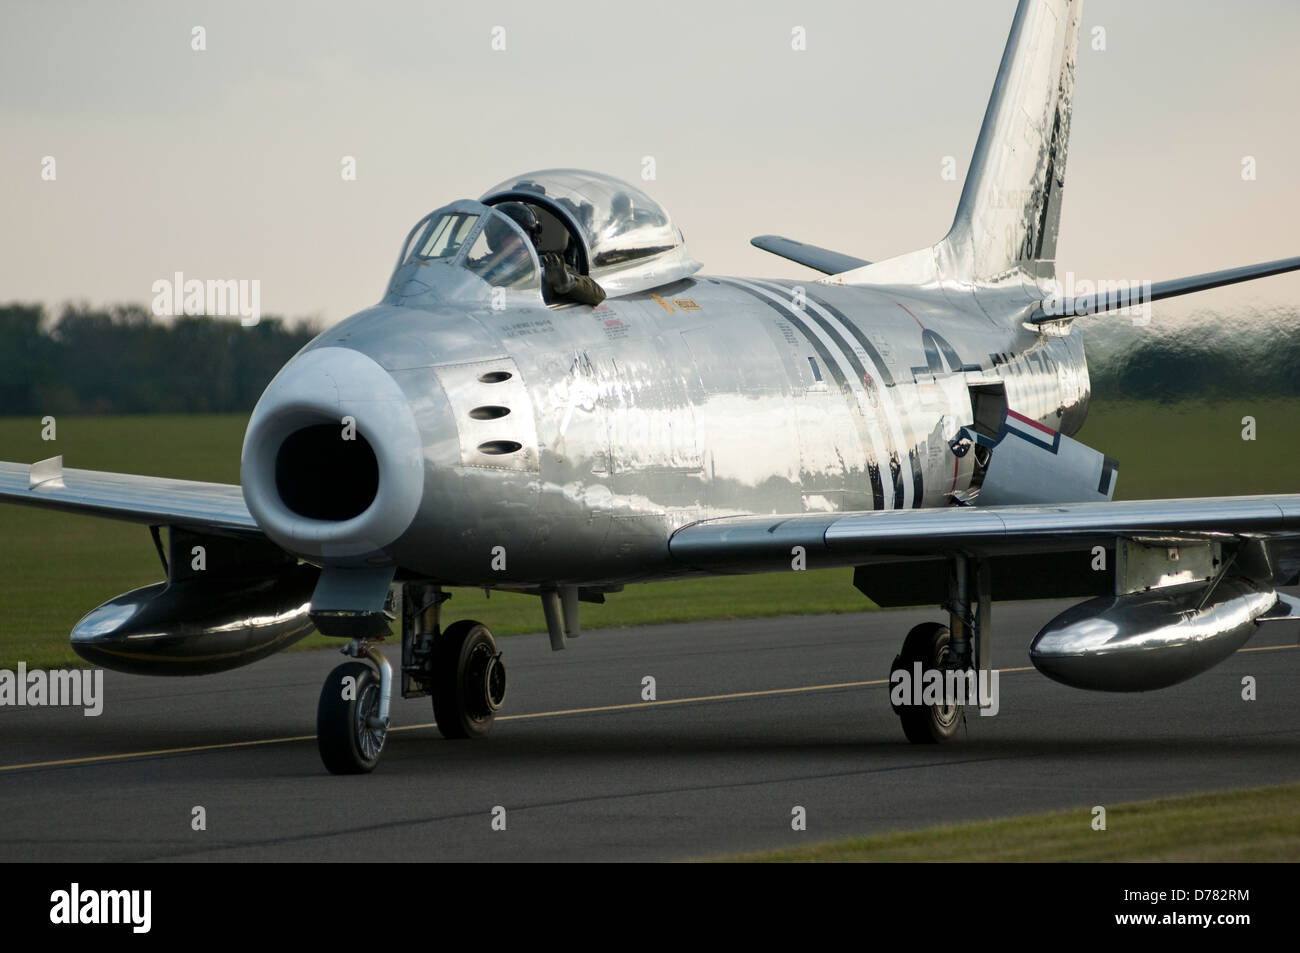 A 1950s USAF F86 jet fighter is seen taxing along an airfield runway. Stock Photo